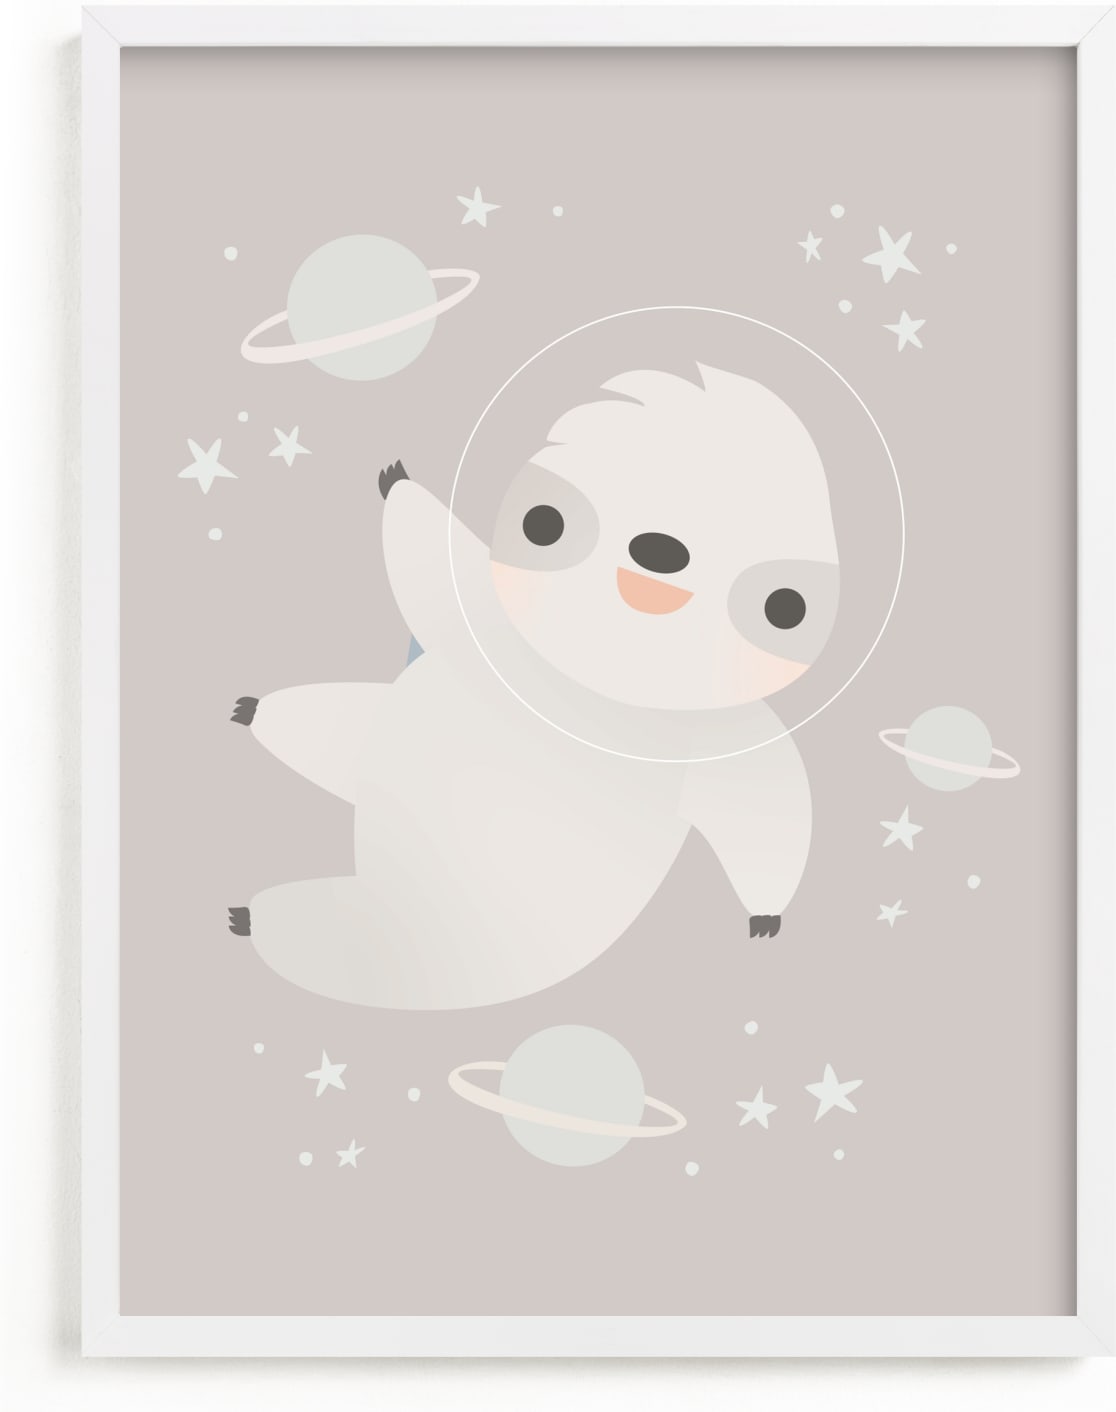 This is a colorful nursery wall art by Lori Wemple called Sloth in Space.